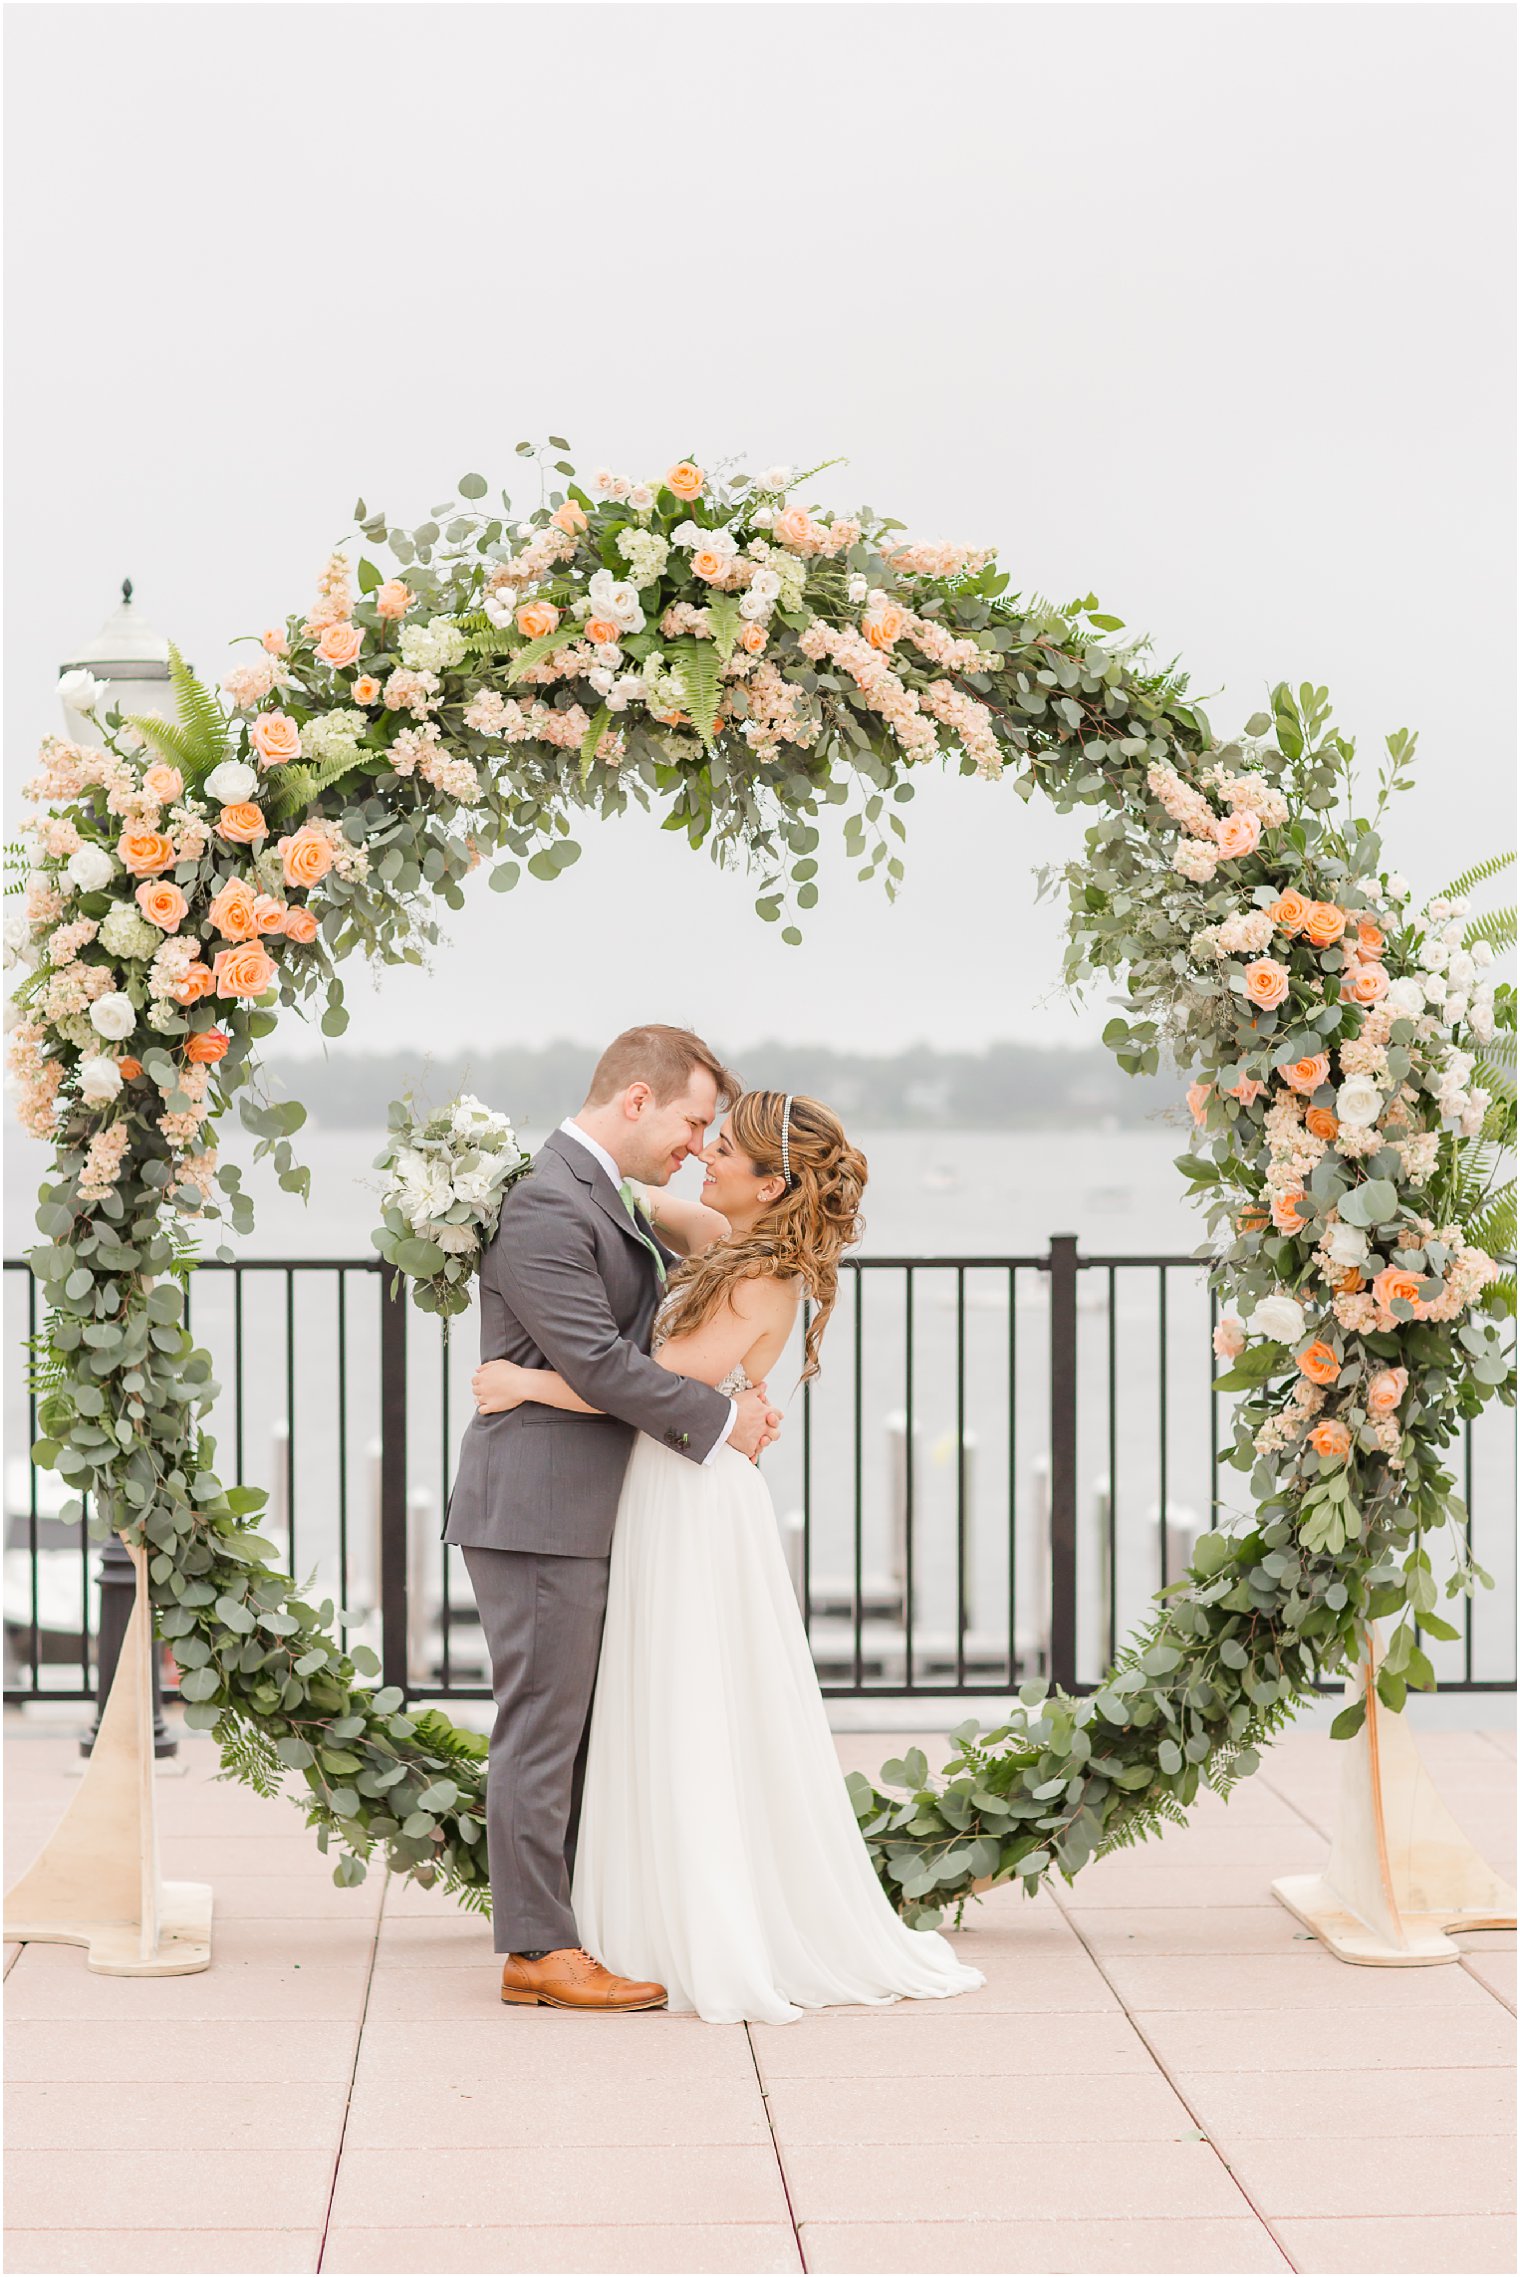 Bride and groom kissing by giant floral wreath by Craig Kiely and Darryn Murphy Designs